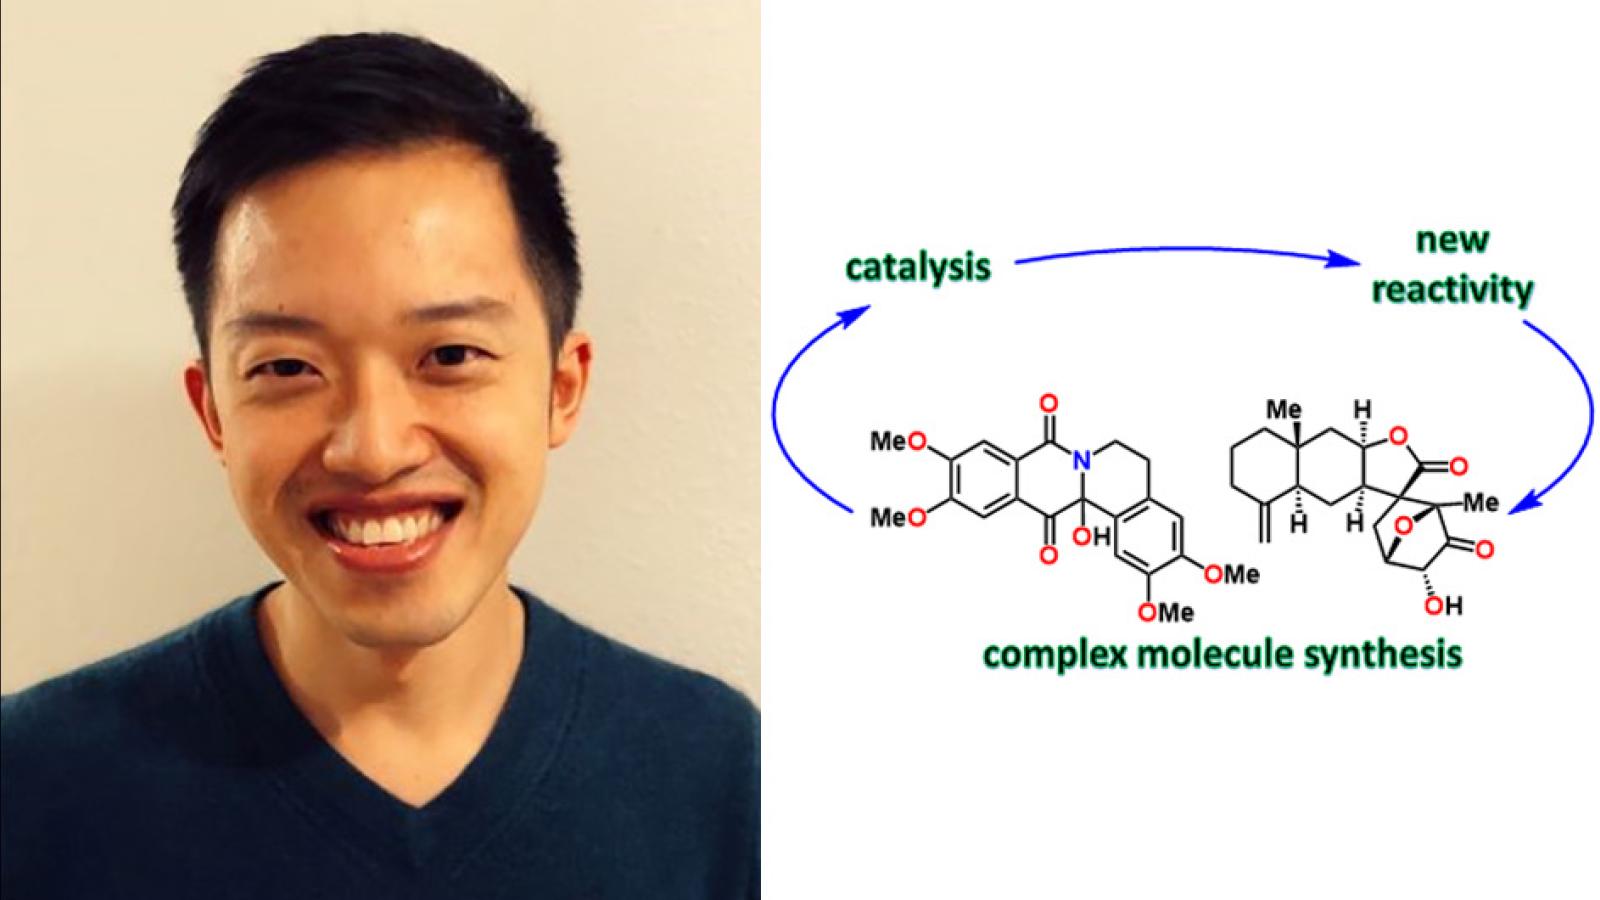 Kevin Kou and synthesis of complex natural products